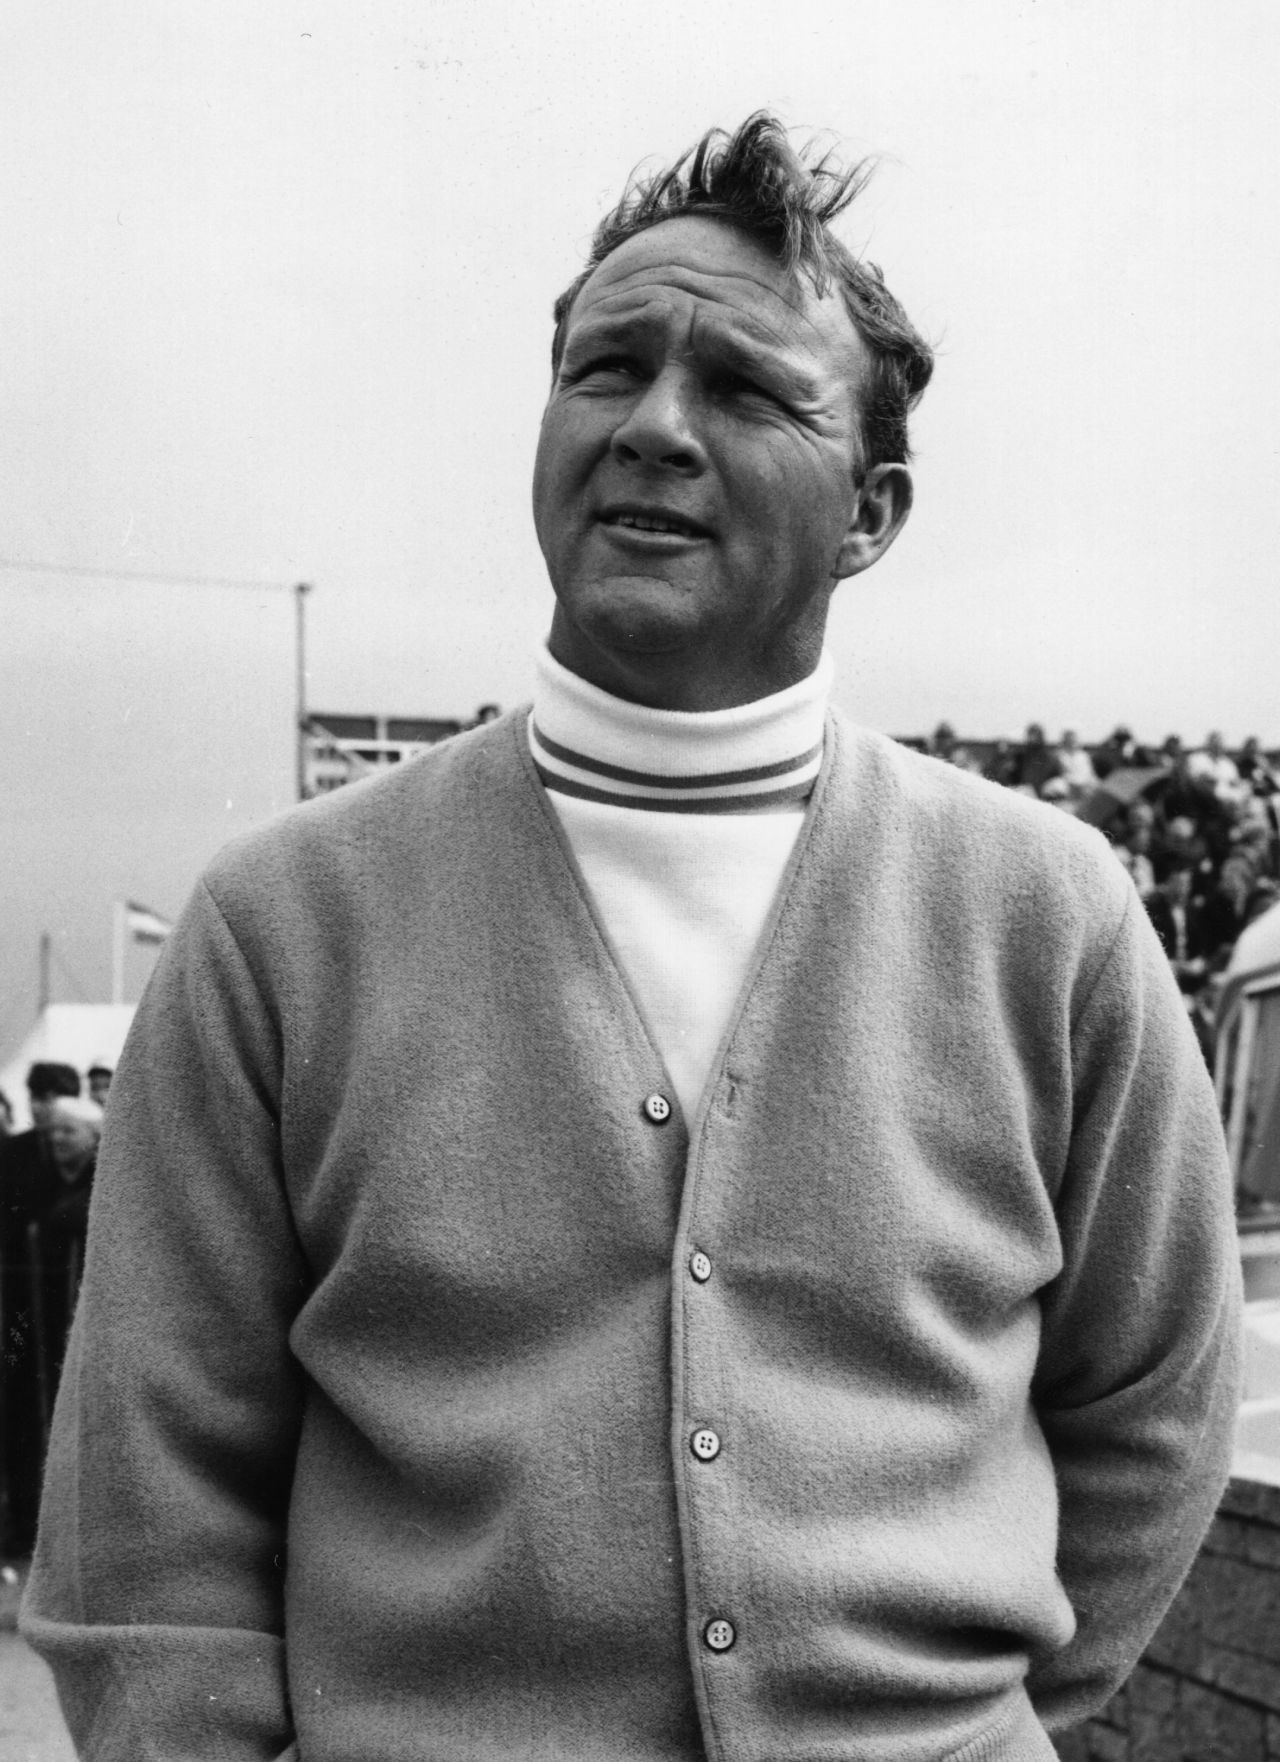 Arnold Palmer, one of golf's original "Big Three," championed the roll neck back in the day.